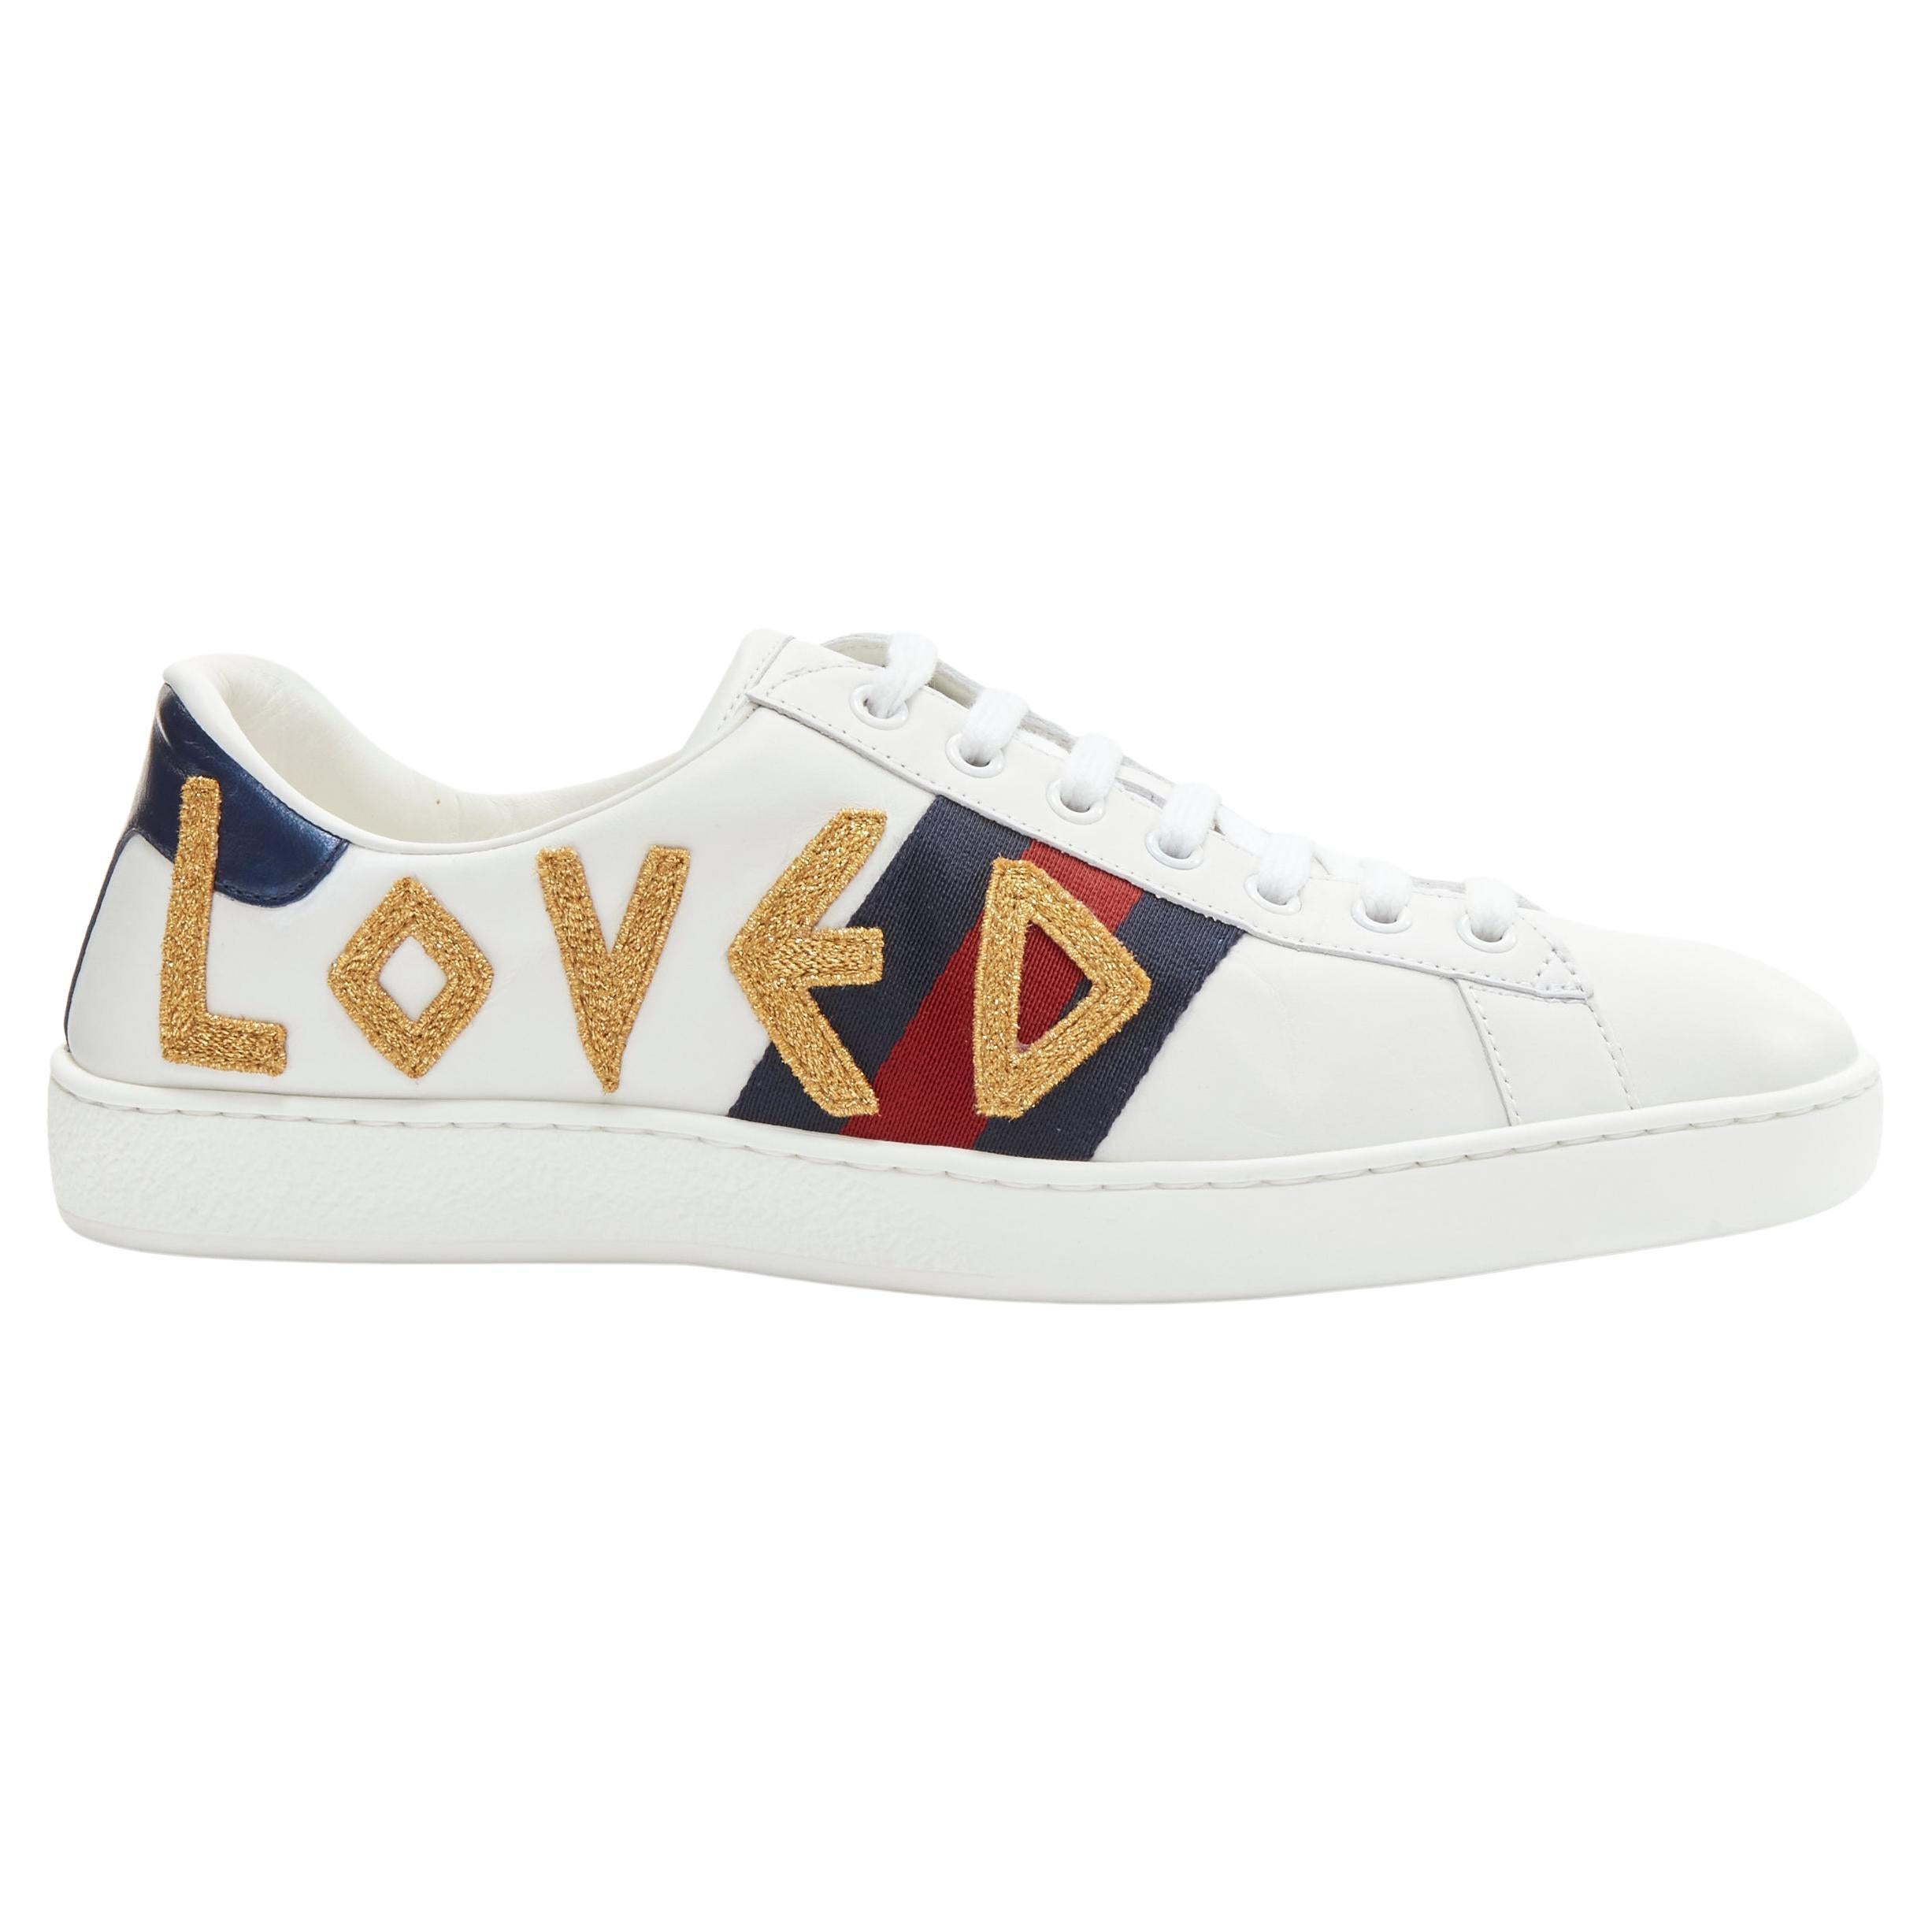 GUCCI Ace Loved gold embroidered blue red web leather sneakers UK8.5 EU42.5 For Sale